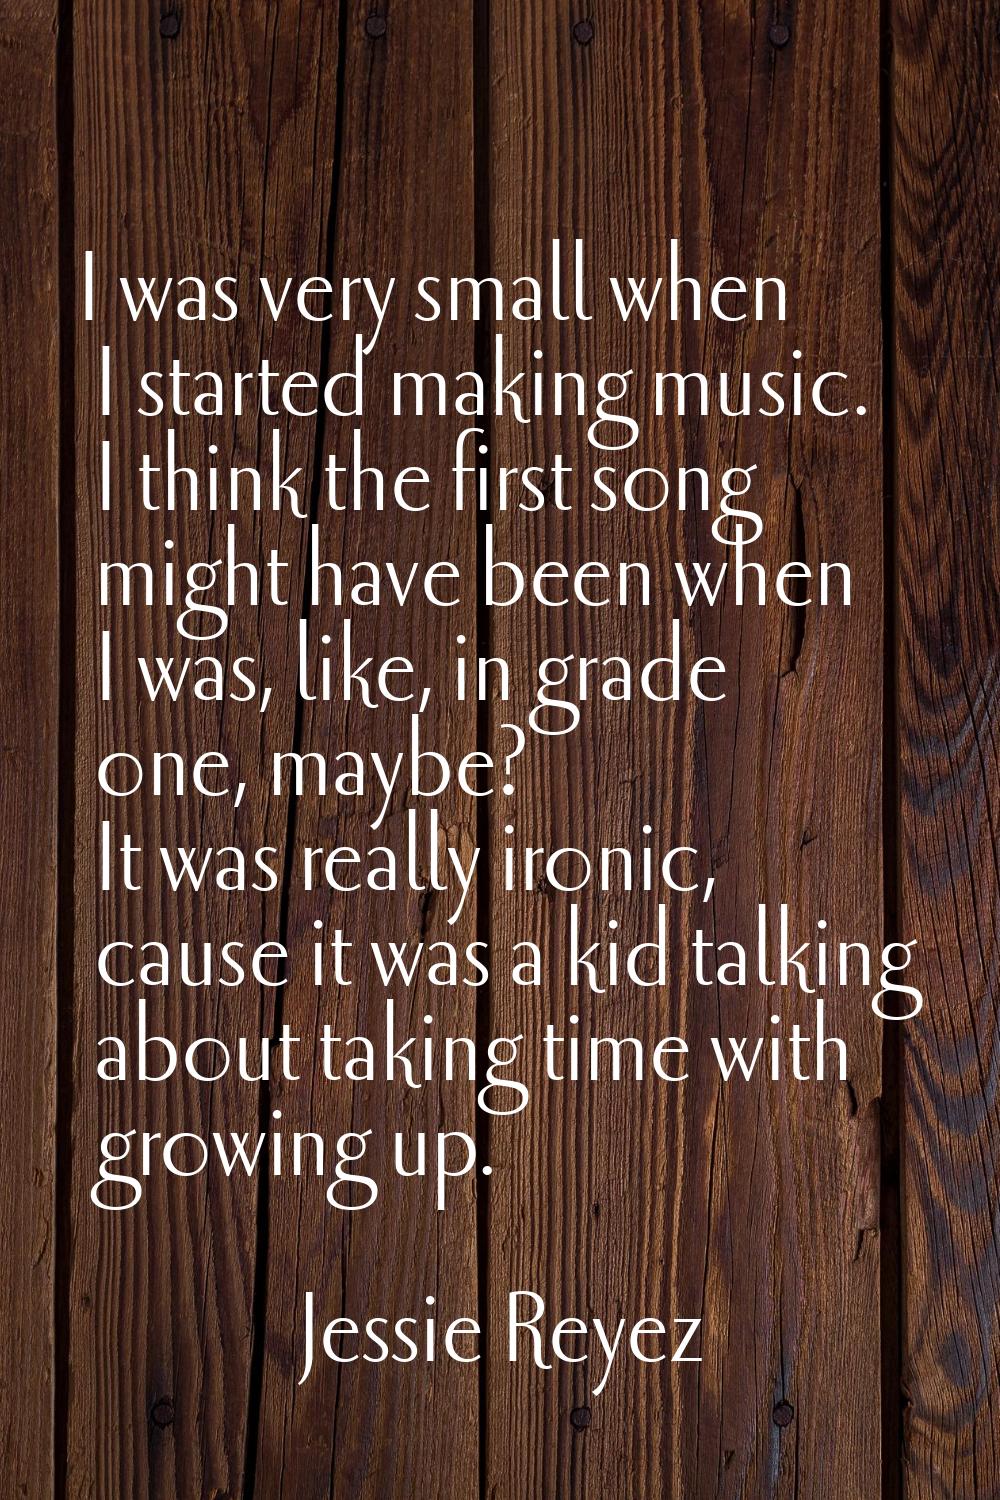 I was very small when I started making music. I think the first song might have been when I was, li